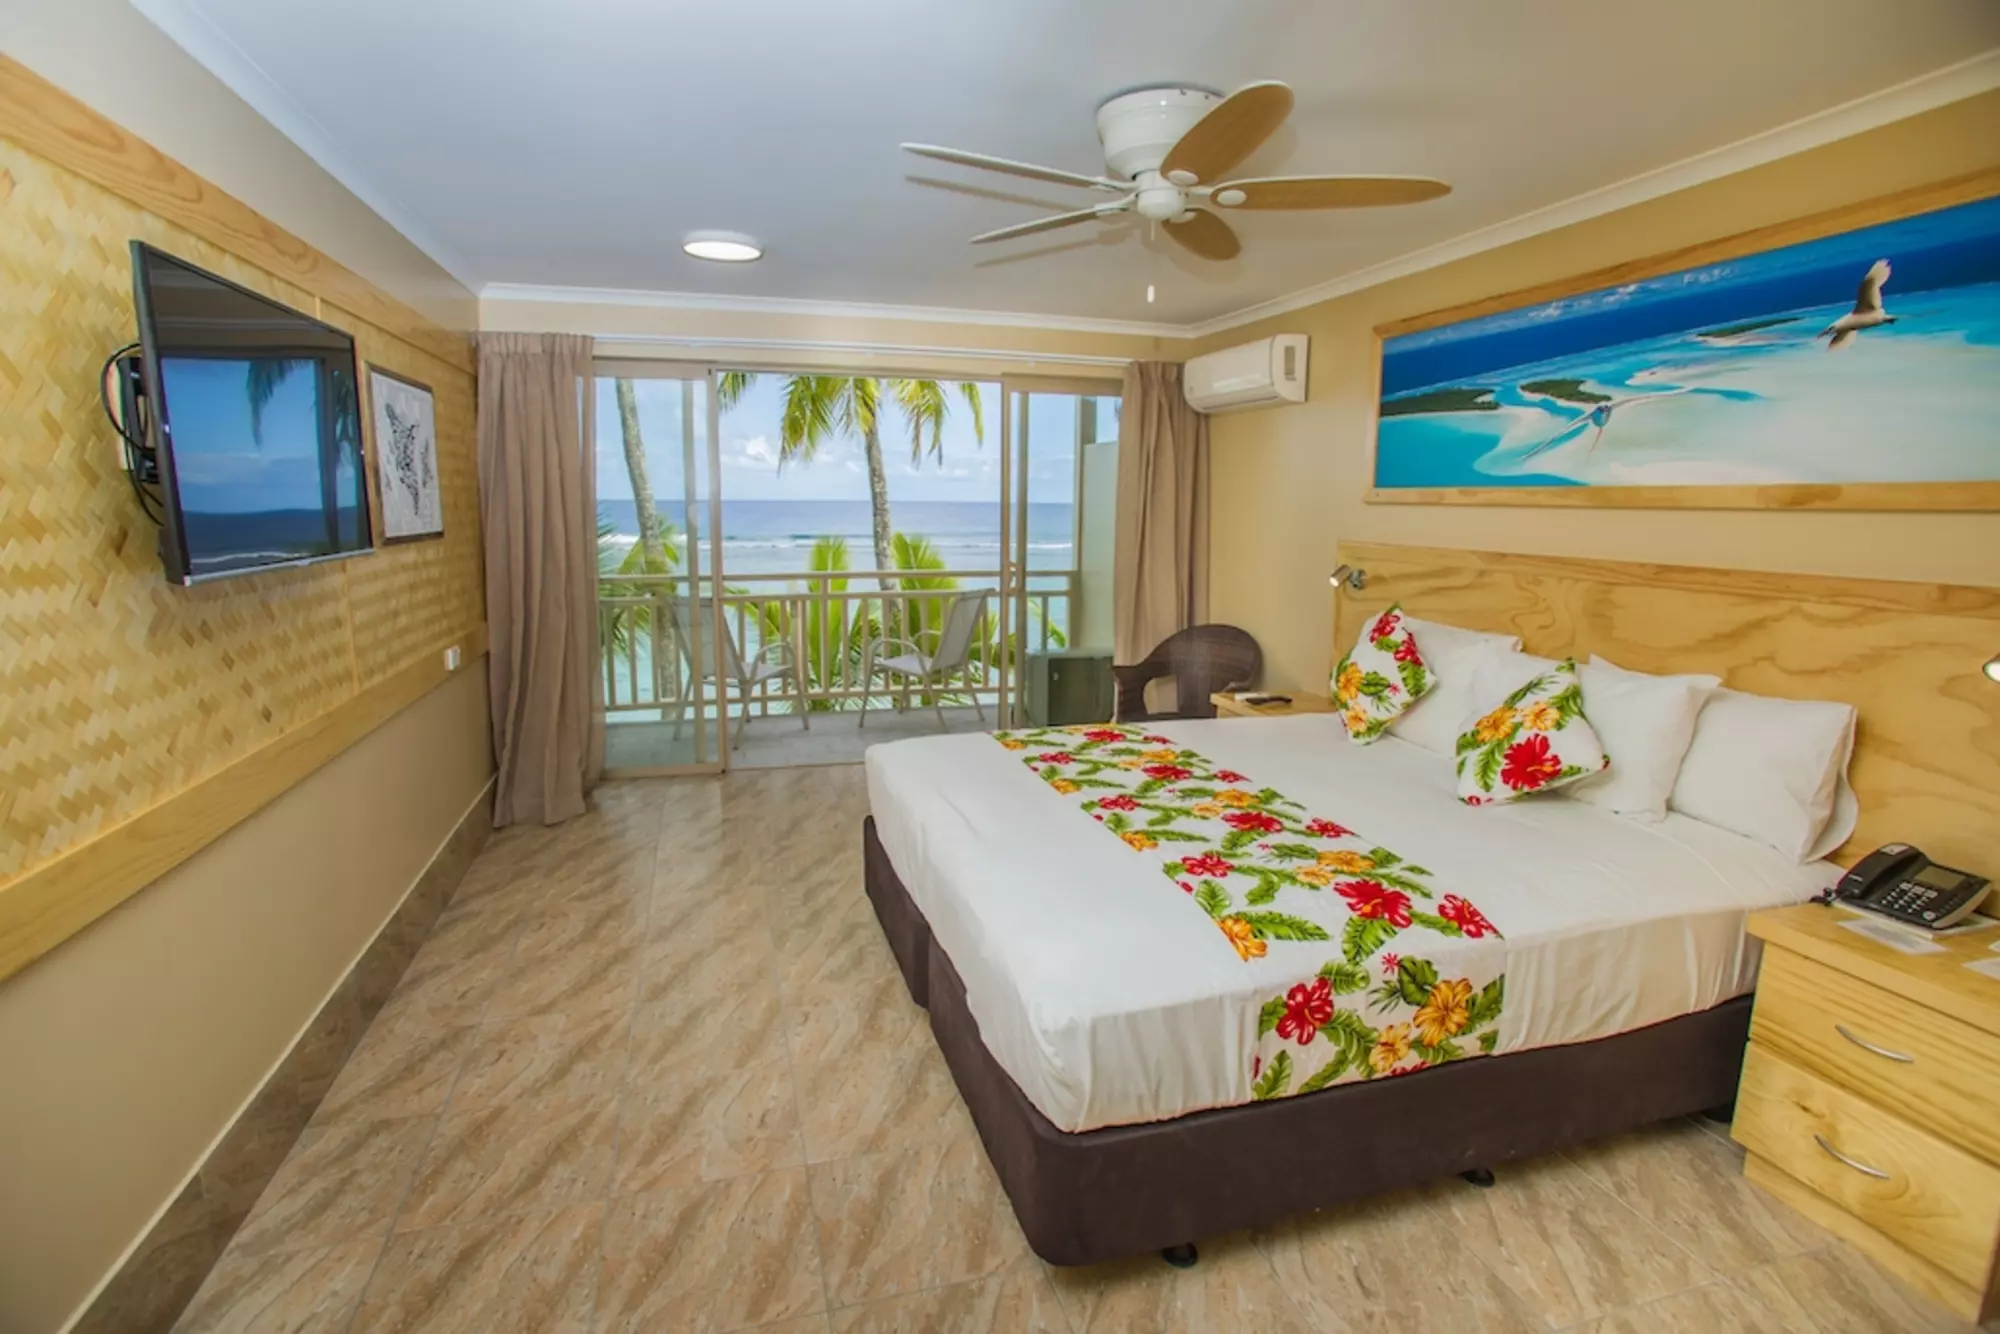 Edgewater Resort and Spa's beach front room